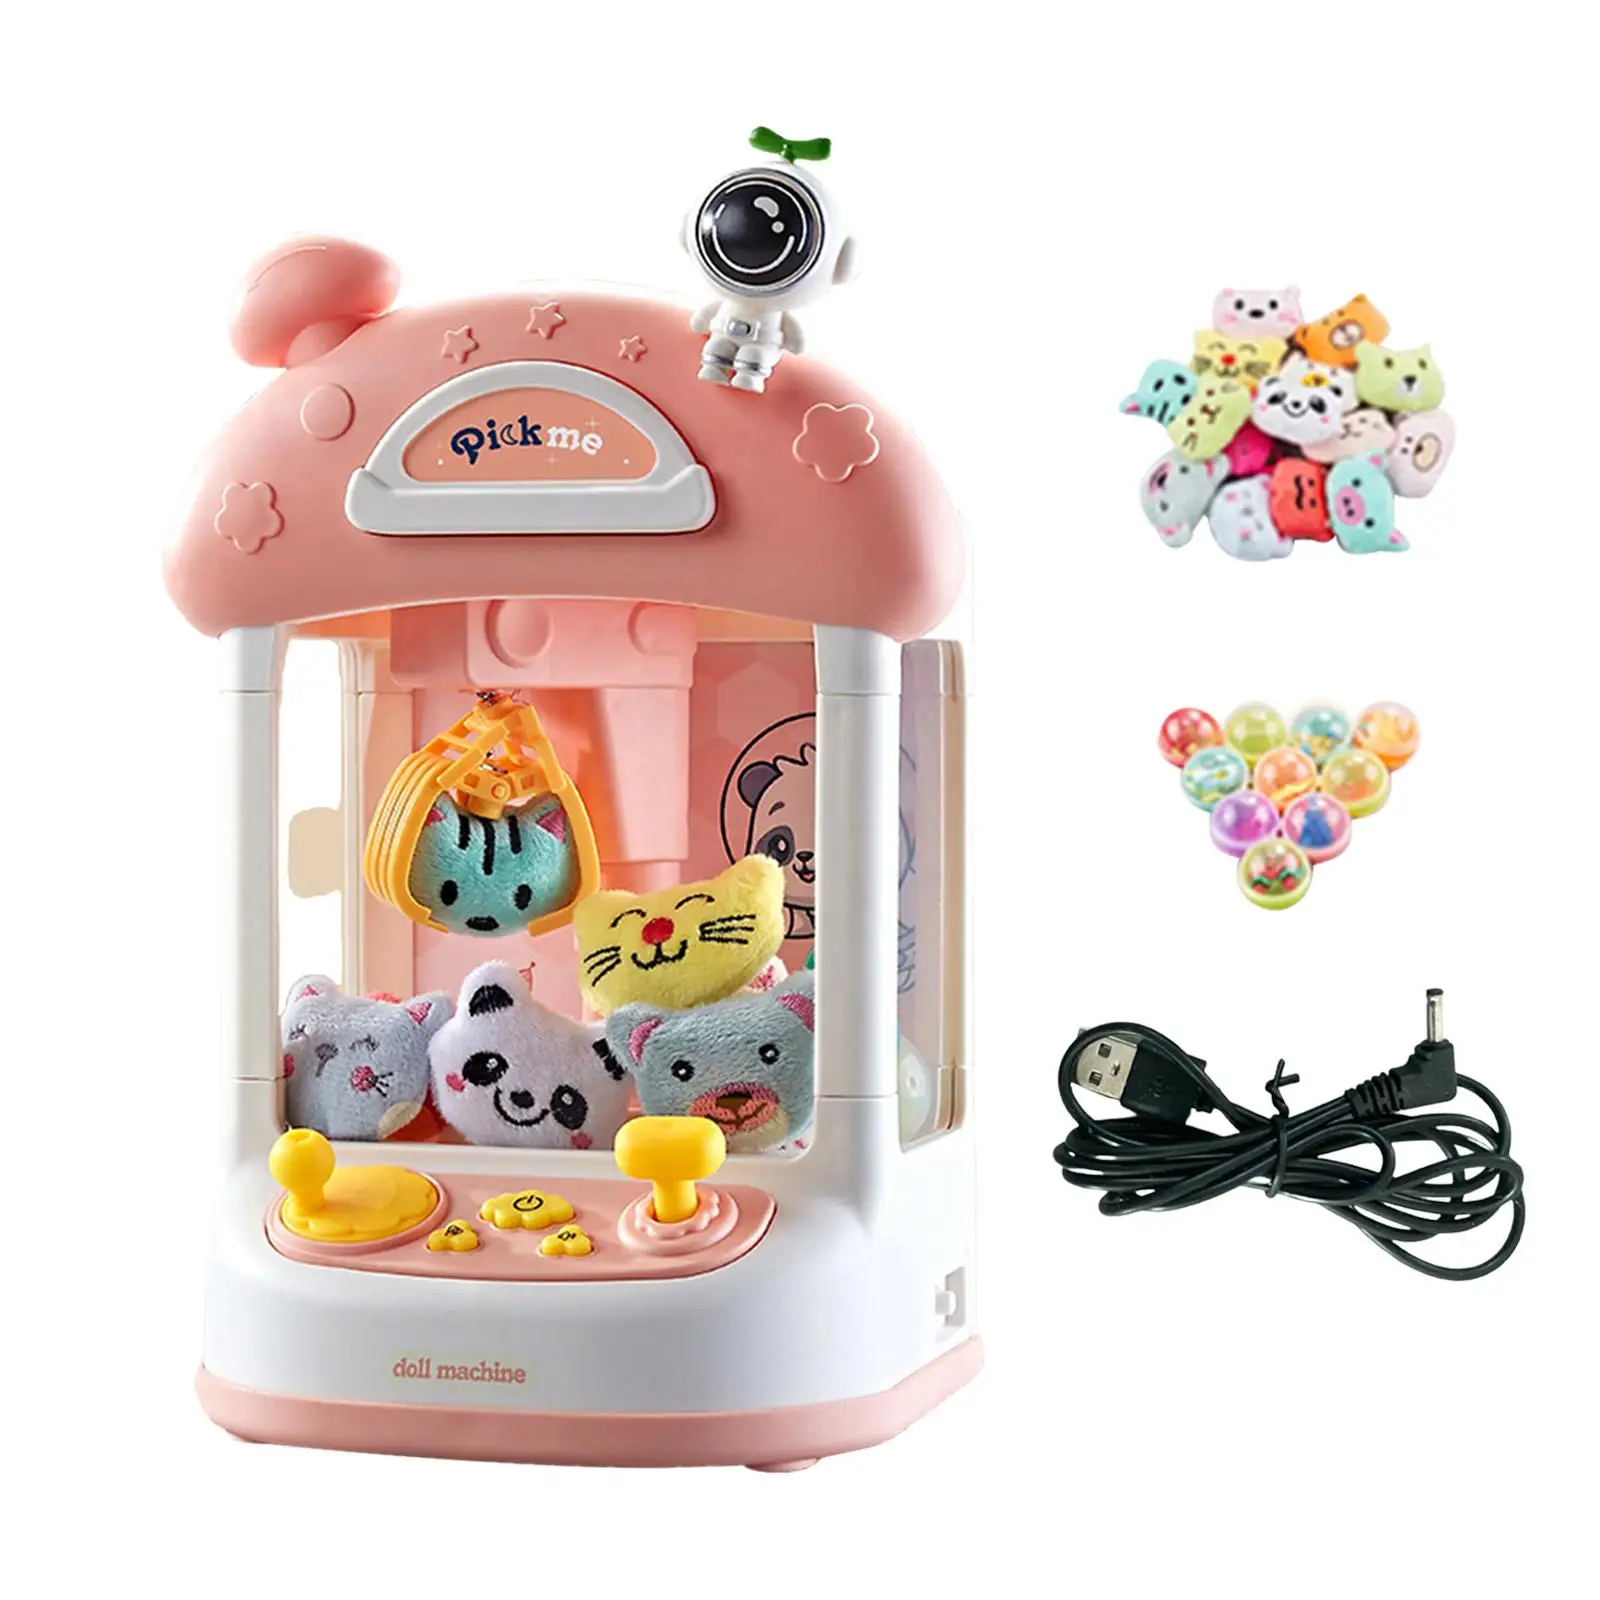 Kids Claw Machine Mini Claw Game Electronic Arcade Game with Lights Electronic Small Toys for Girls Children Boys Party Gifts